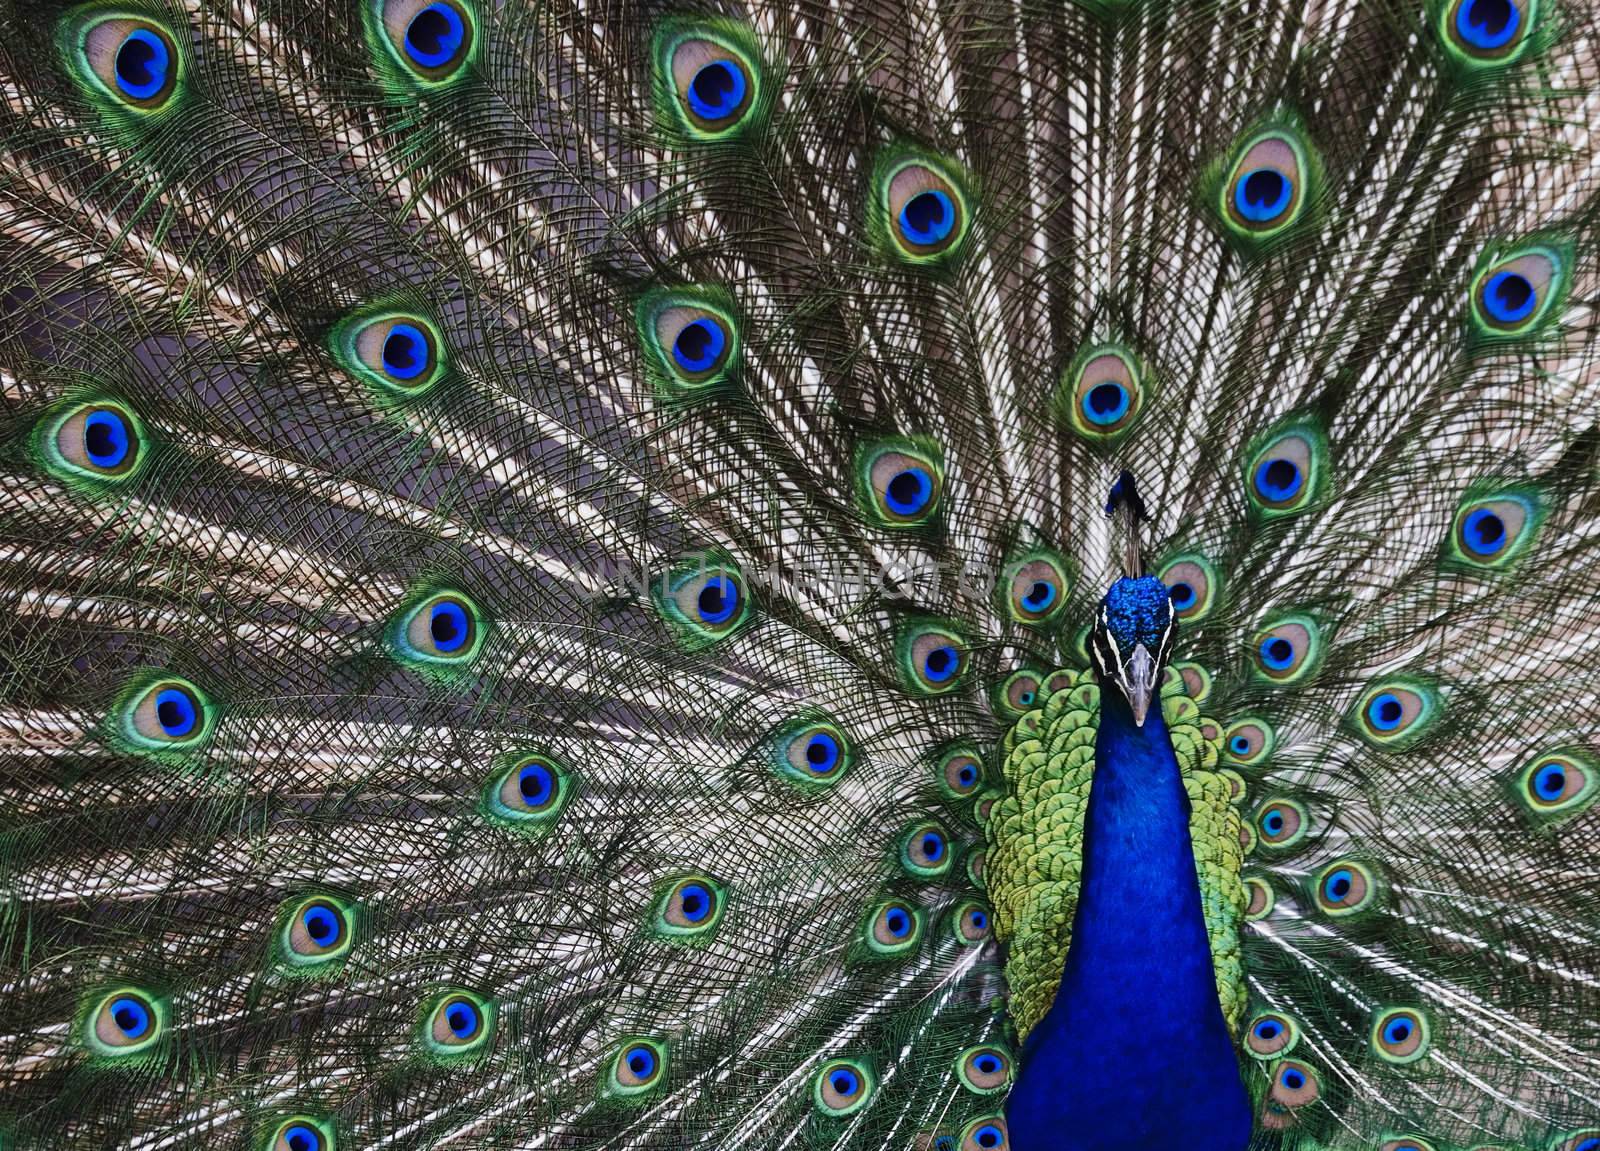 Peacock with his tail feathers on display to attract a mate.